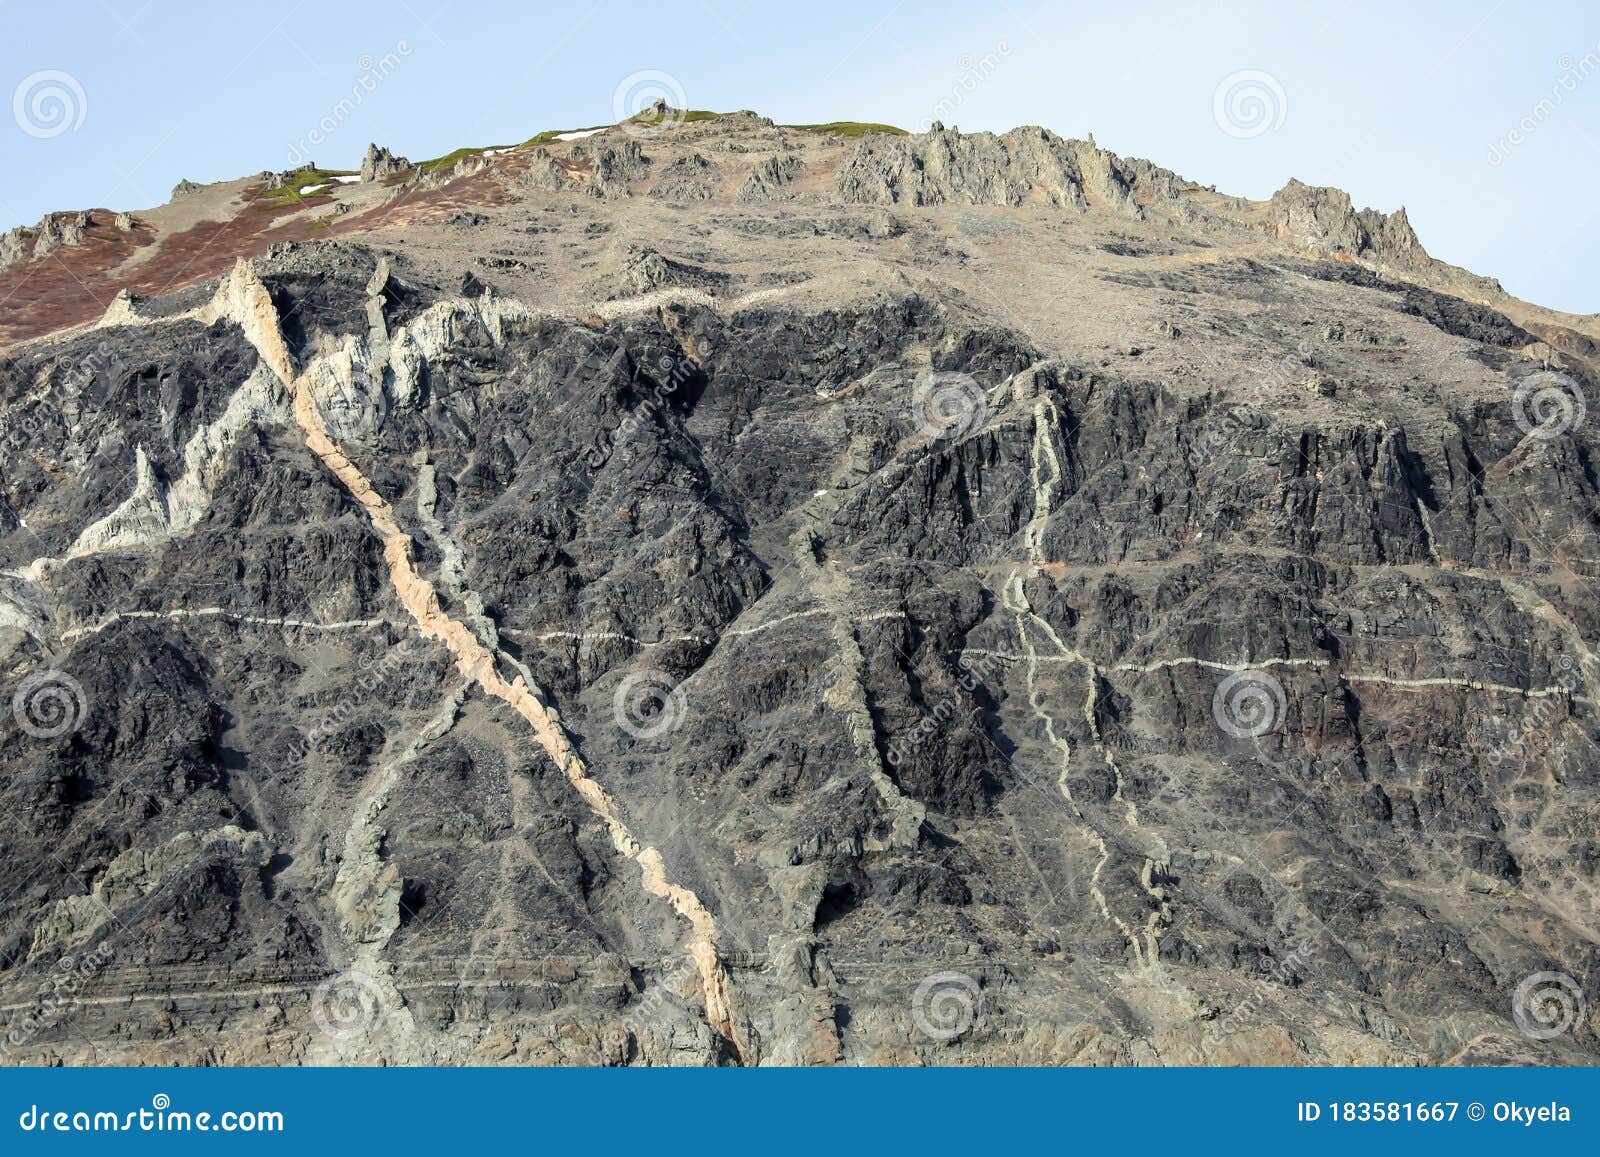 geological outcrops with the exit of vein formations to the surface of the sea coastline